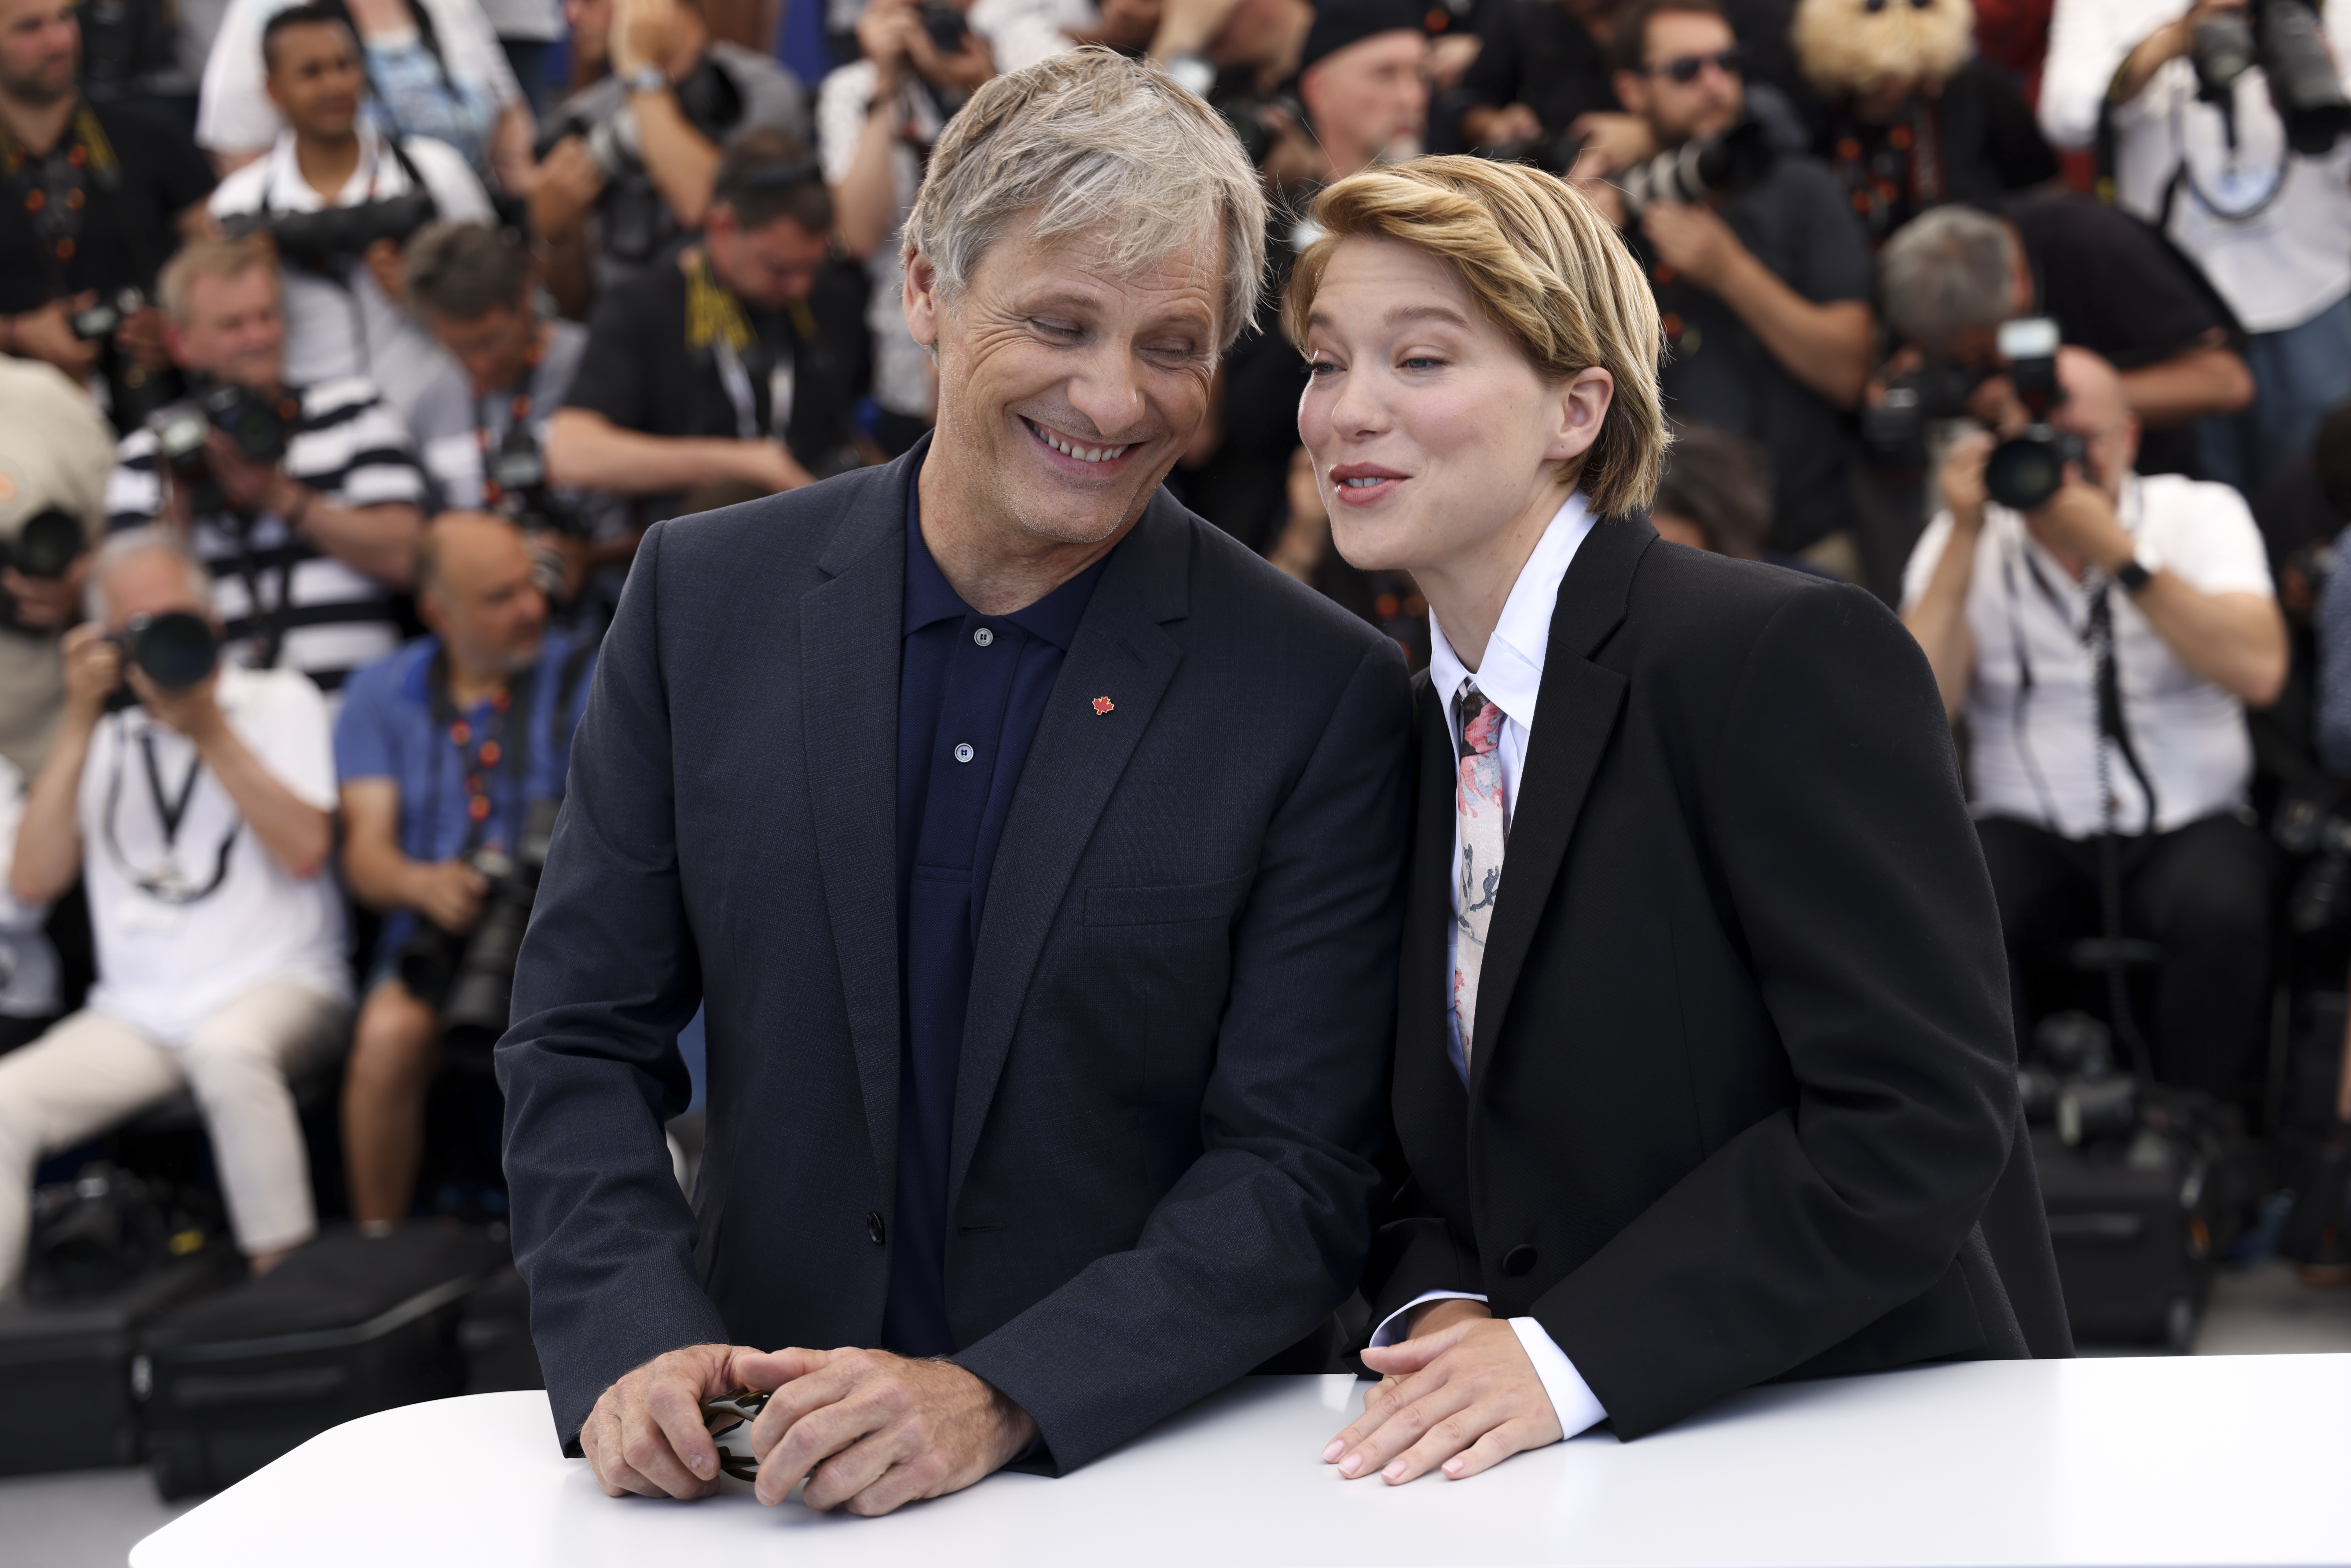 Lea Seydoux Interview – Her Career And Cannes 2021 – Deadline